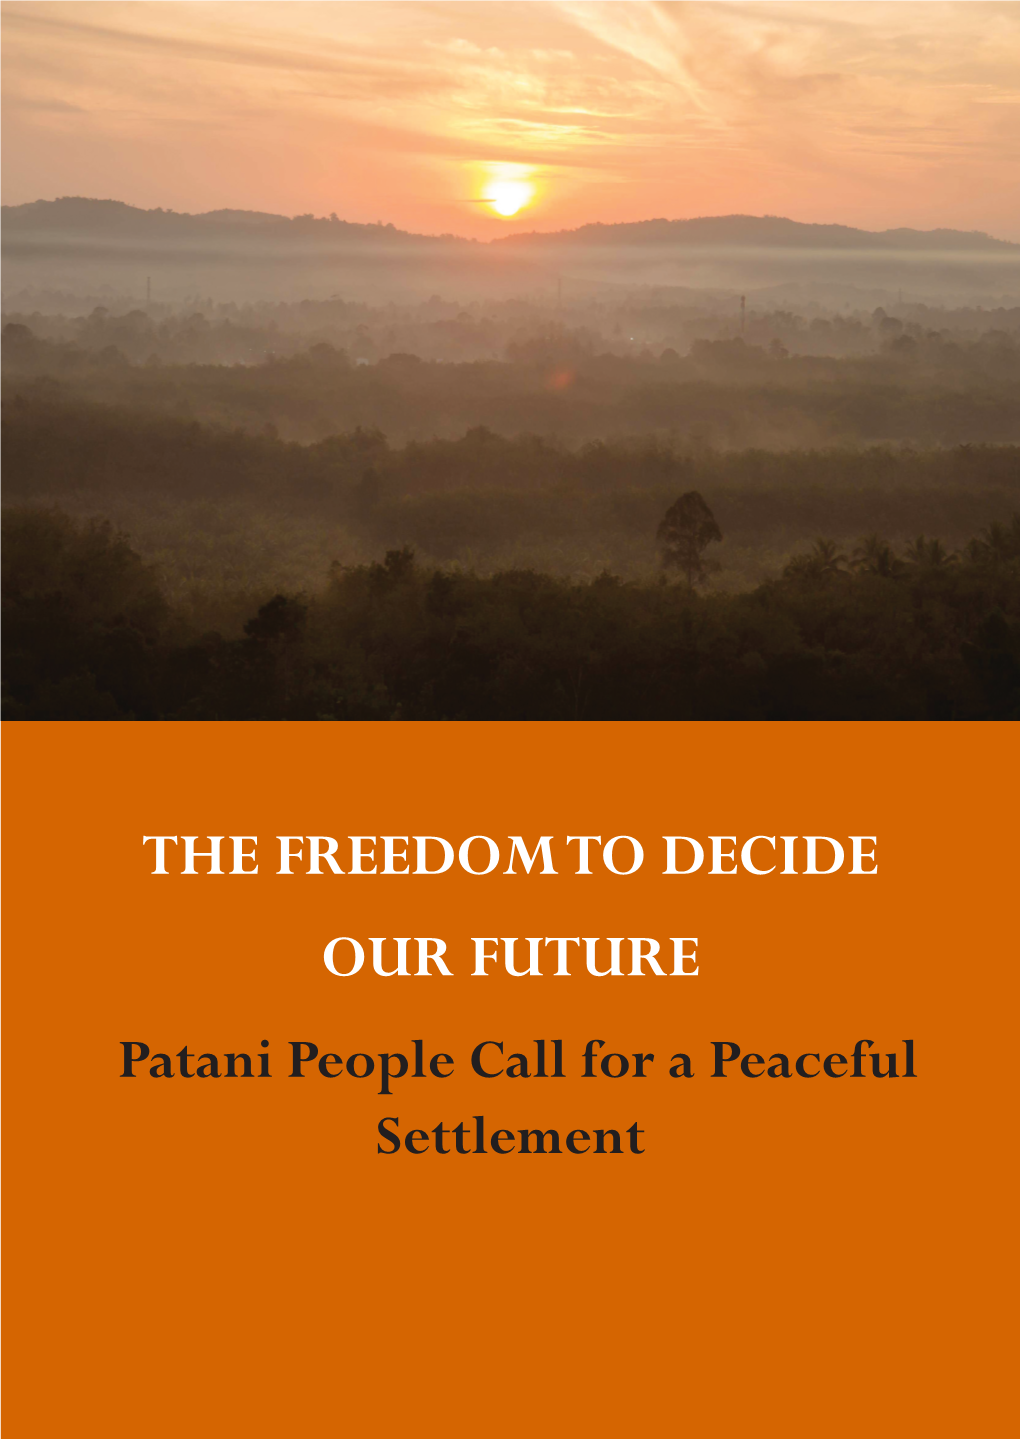 The Freedom to Decide Our Future Patani People Call for a Peaceful Settlement